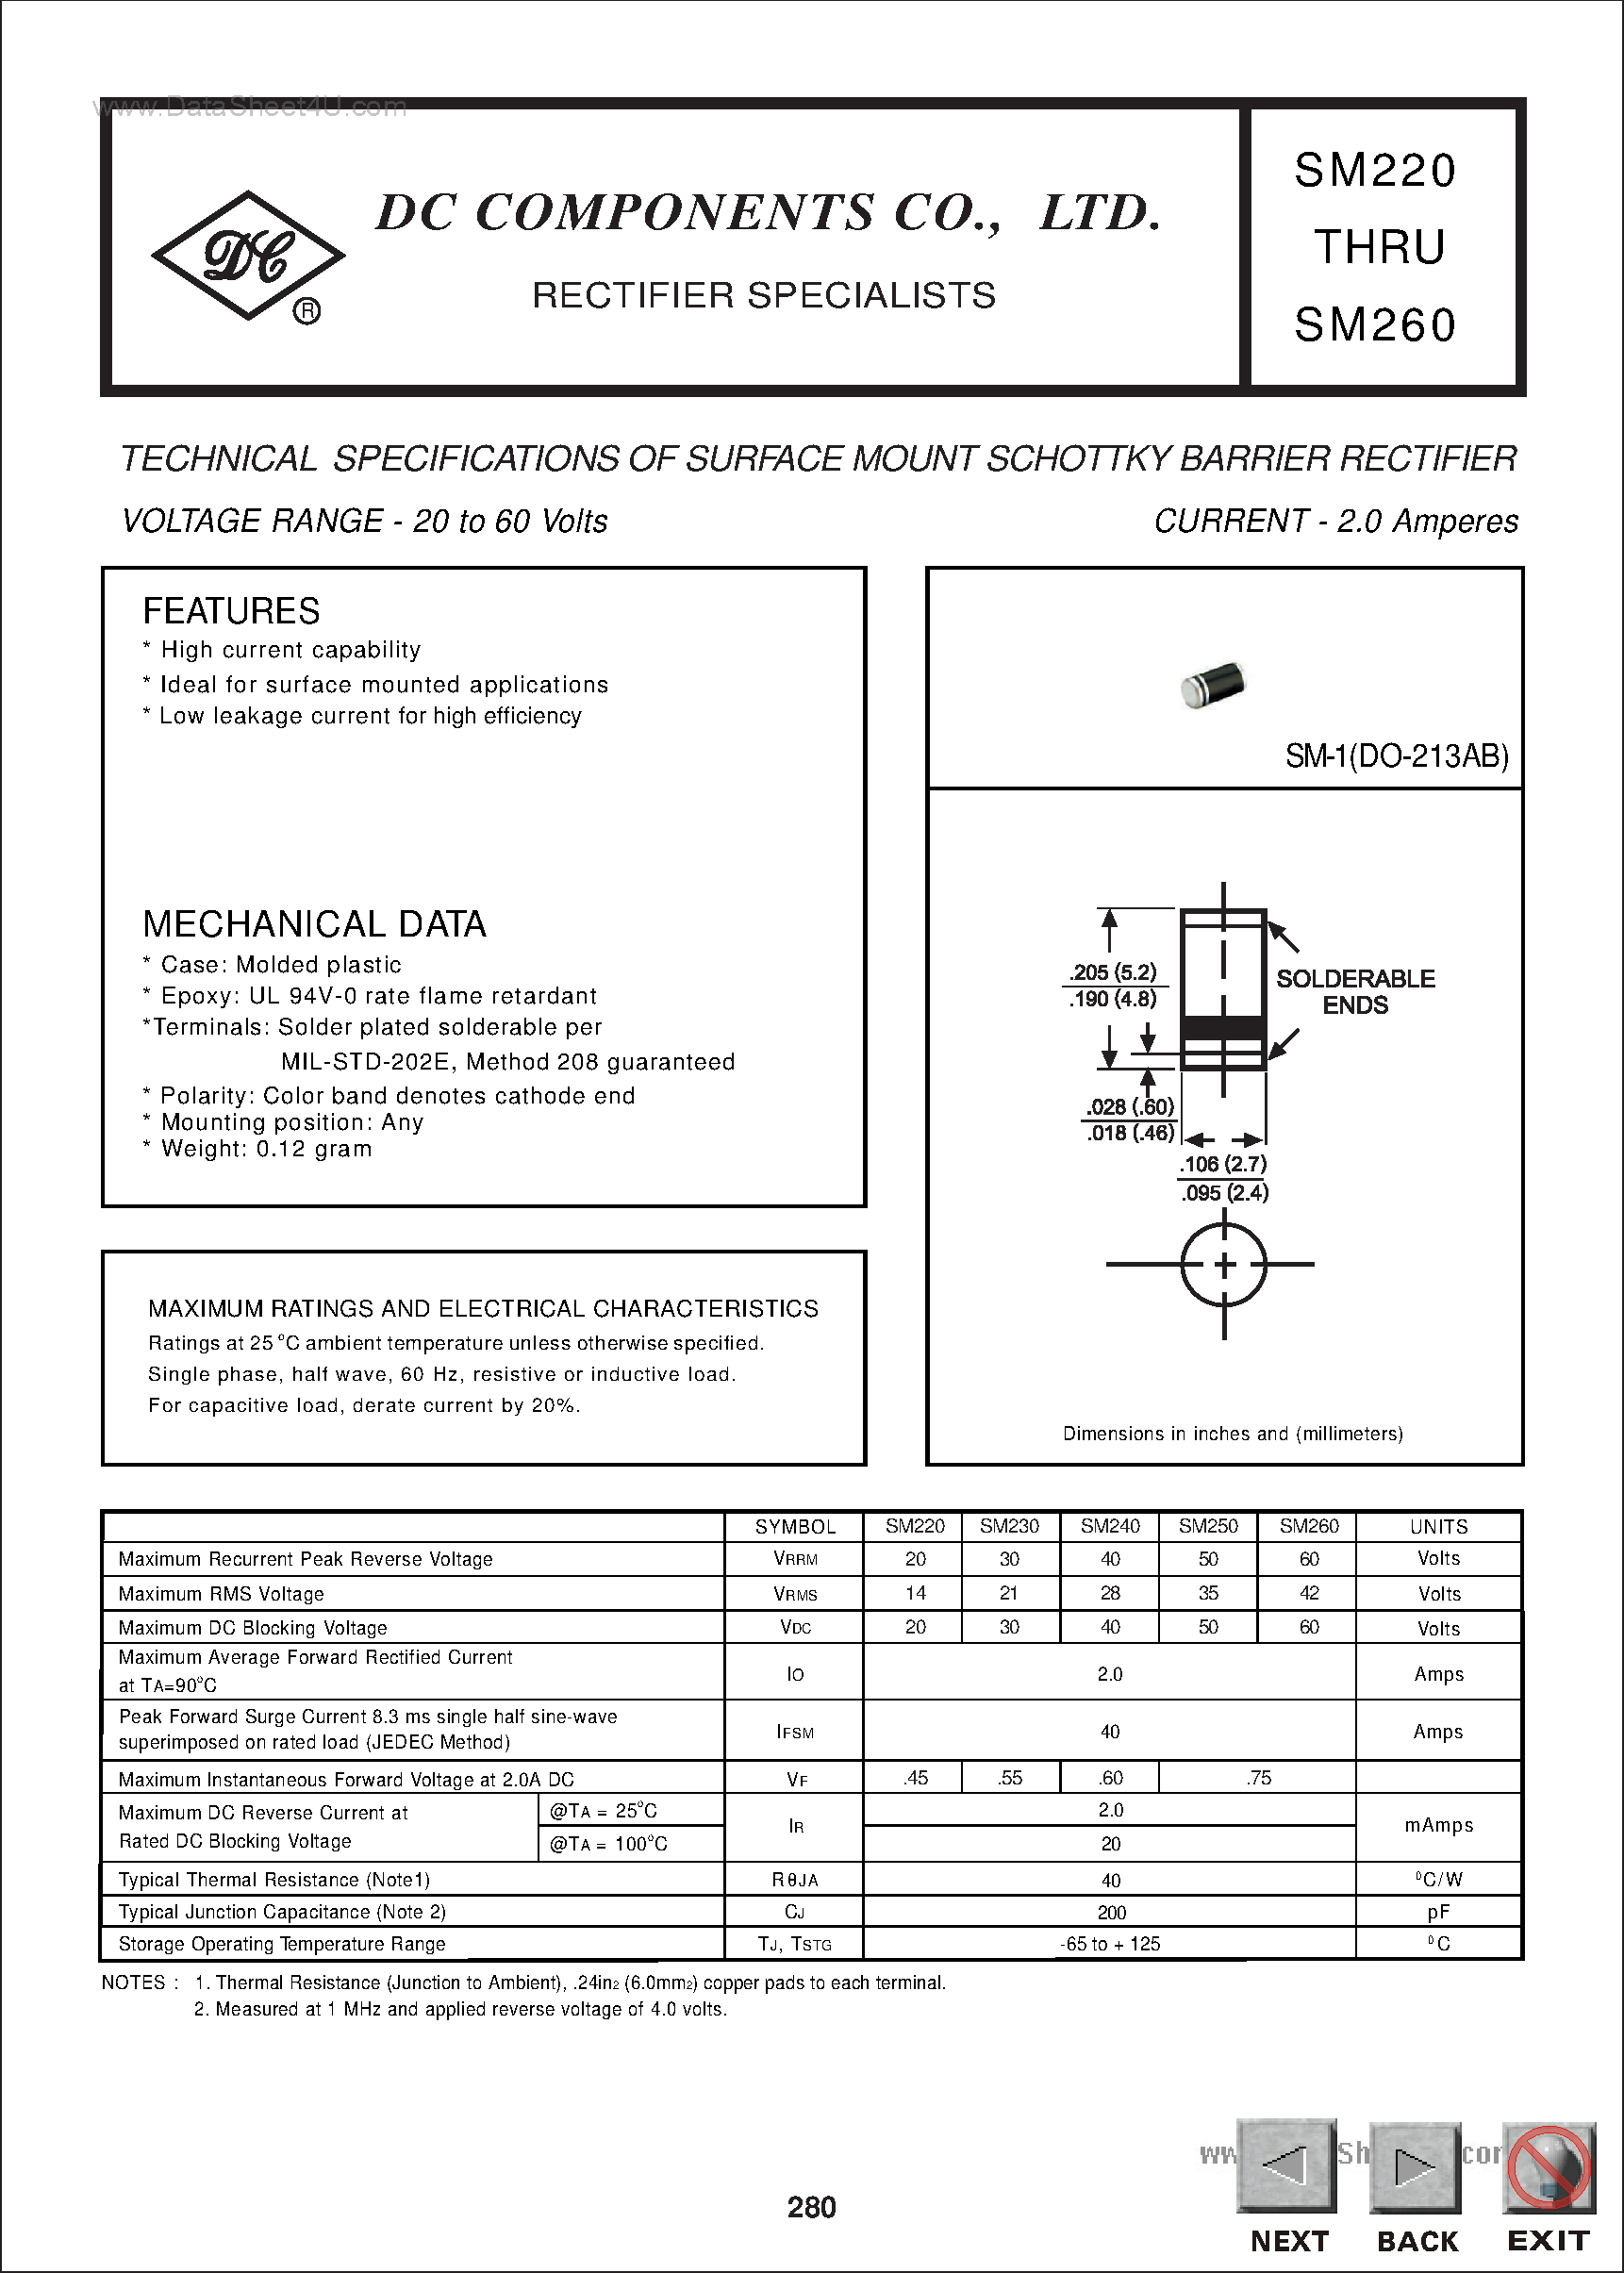 Даташит SM260 - TECHNICAL SPECIFICATIONS OF SURFACE MOUNT SCHOTTKY BARRIER RECTIFIER страница 1